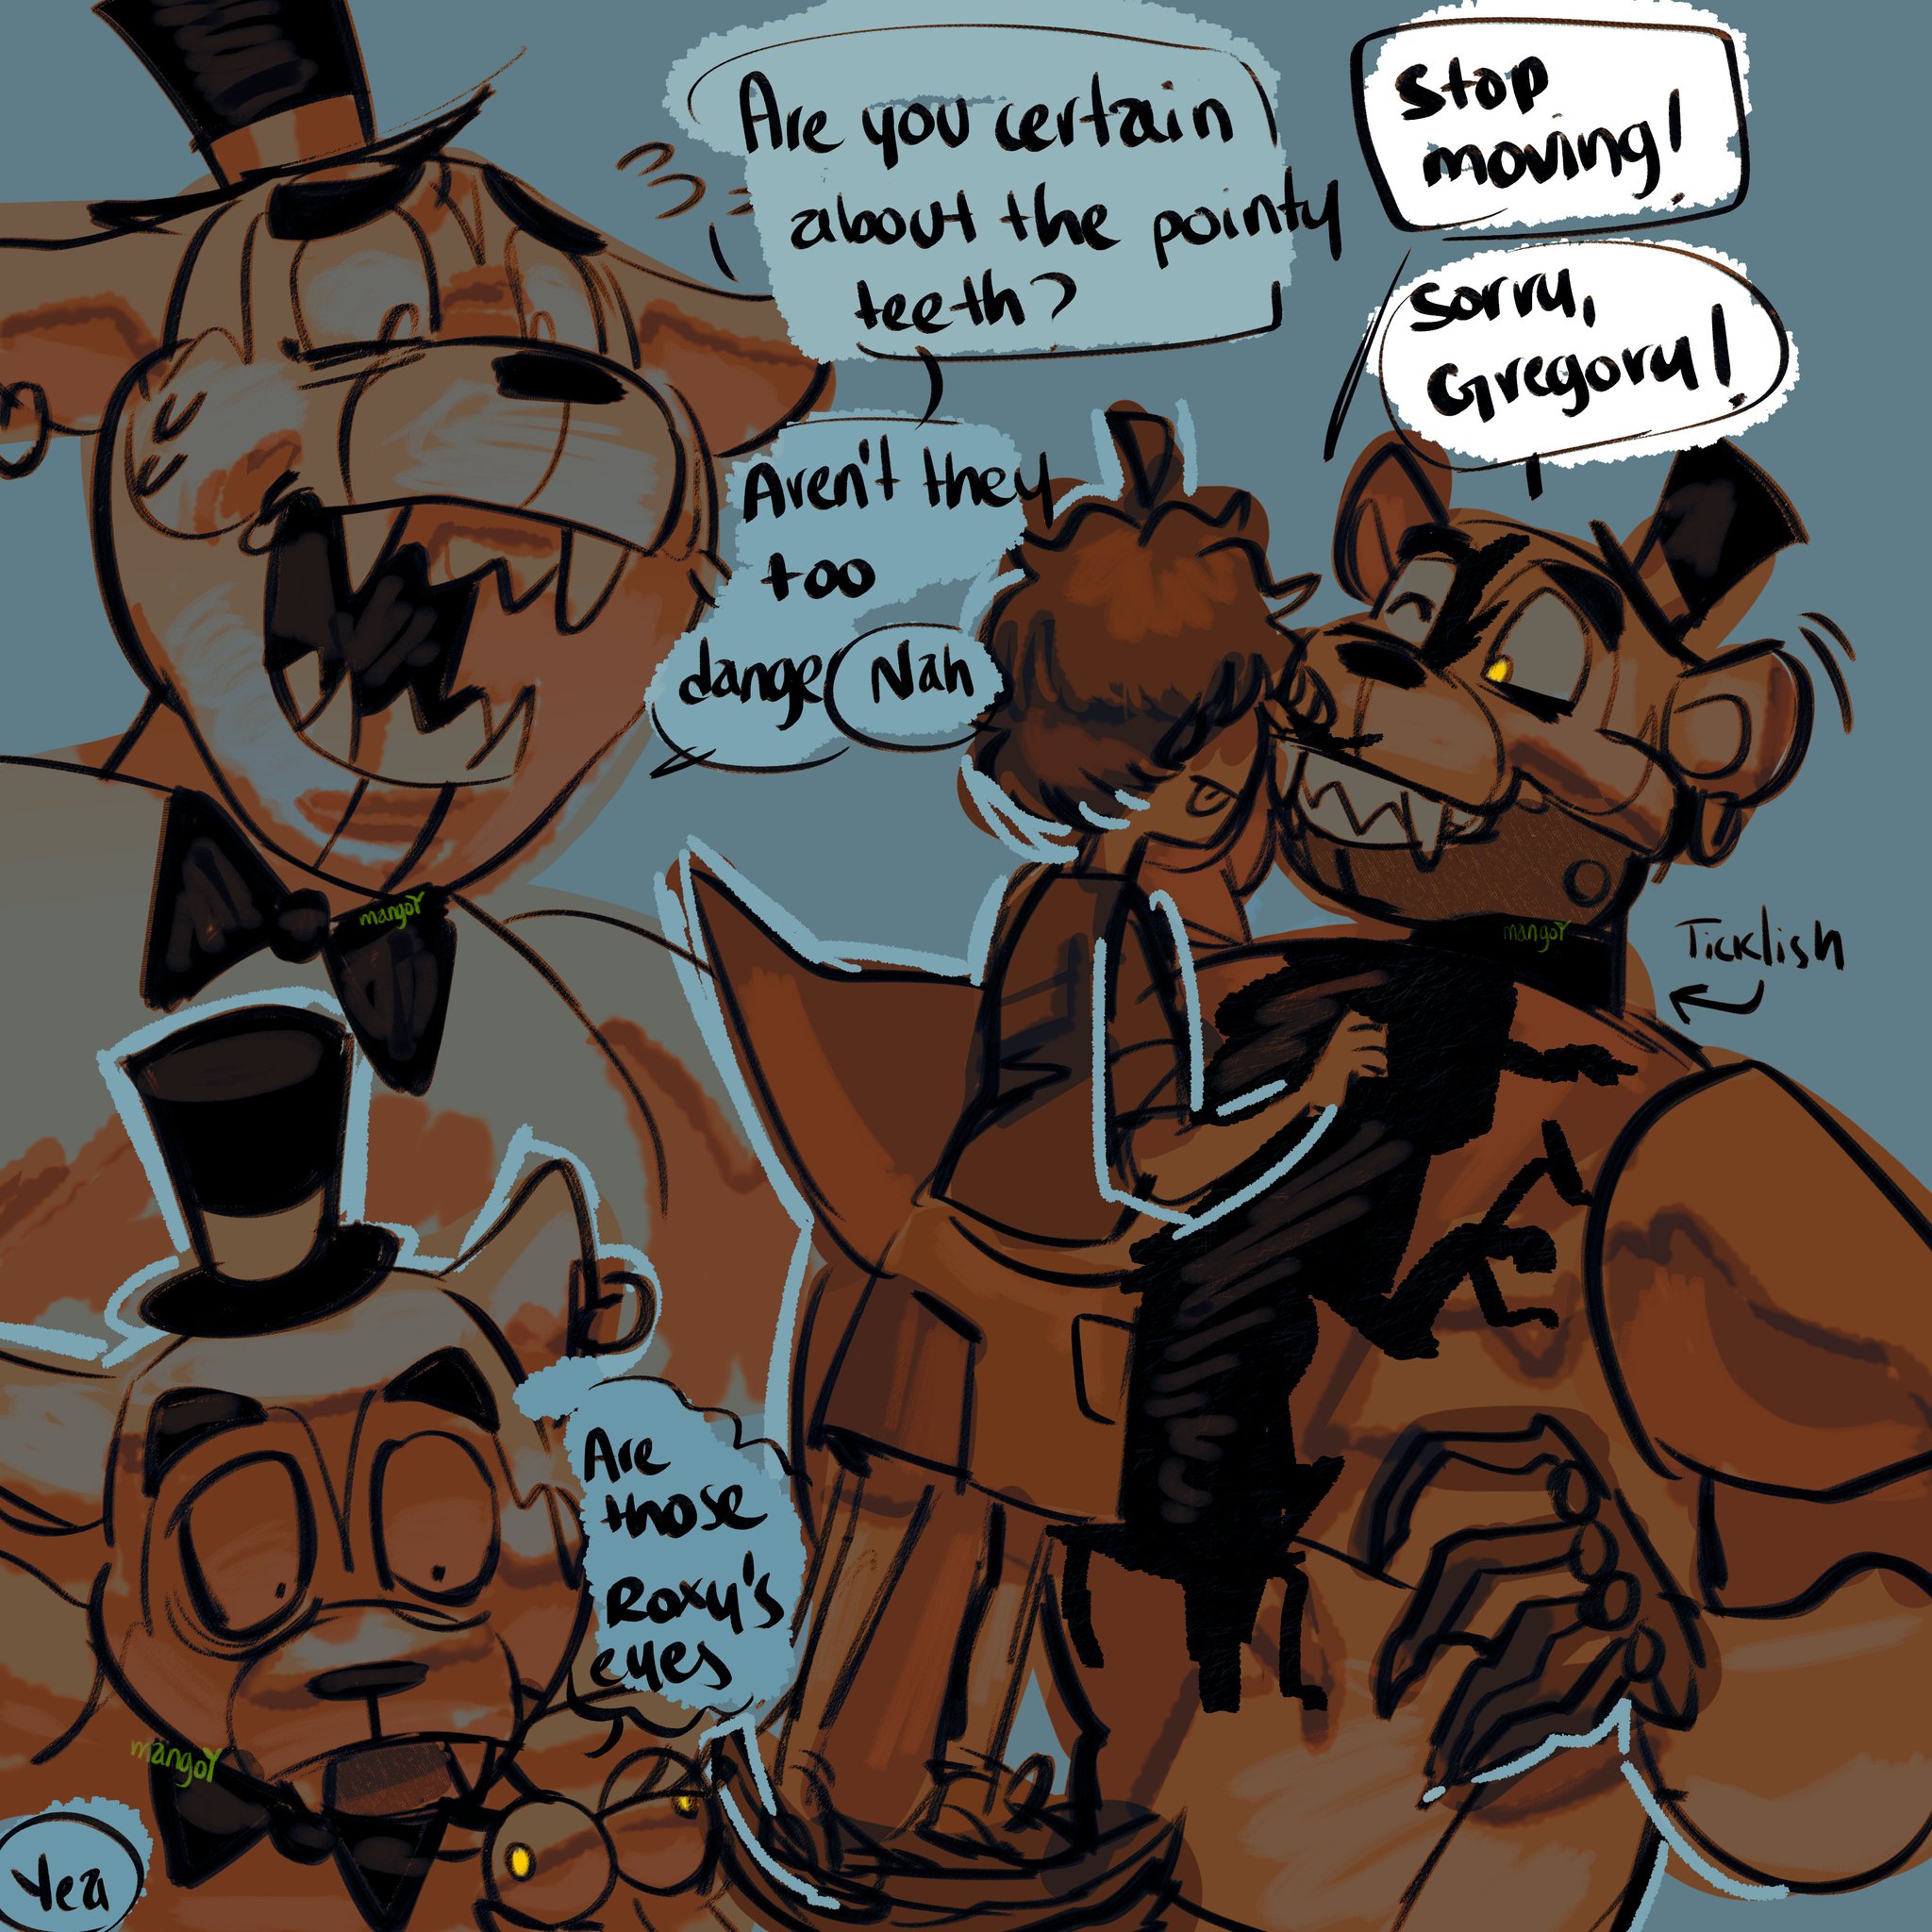 marie ✰ on X: what a wonderful occasion to post Gregory fnaf fanart   / X